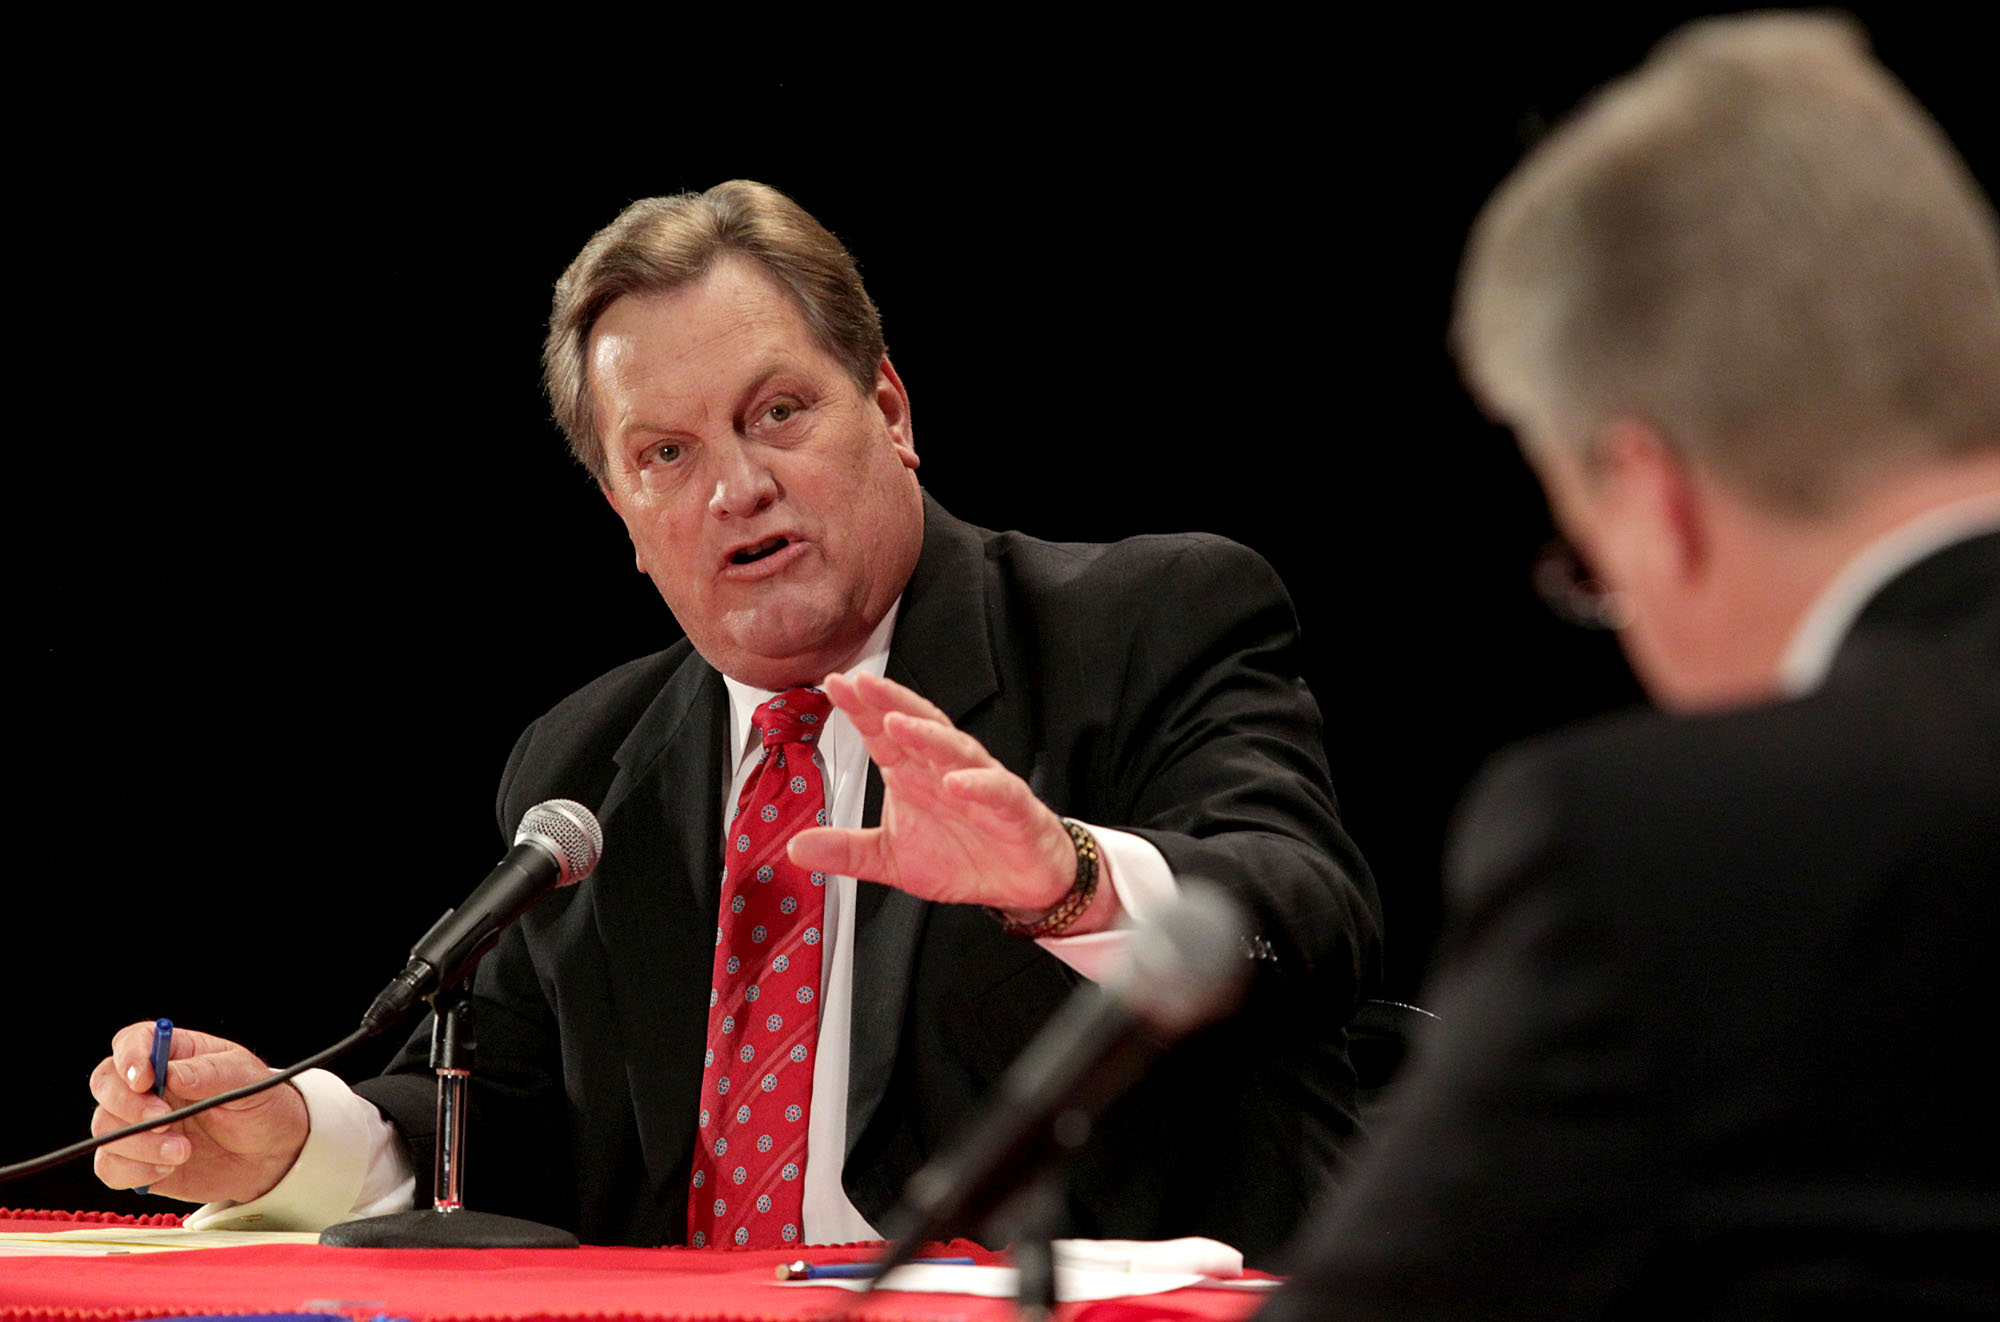 Mike Simpson Advances In Idaho Gop House Primary Tpm Talking Points Memo 9737